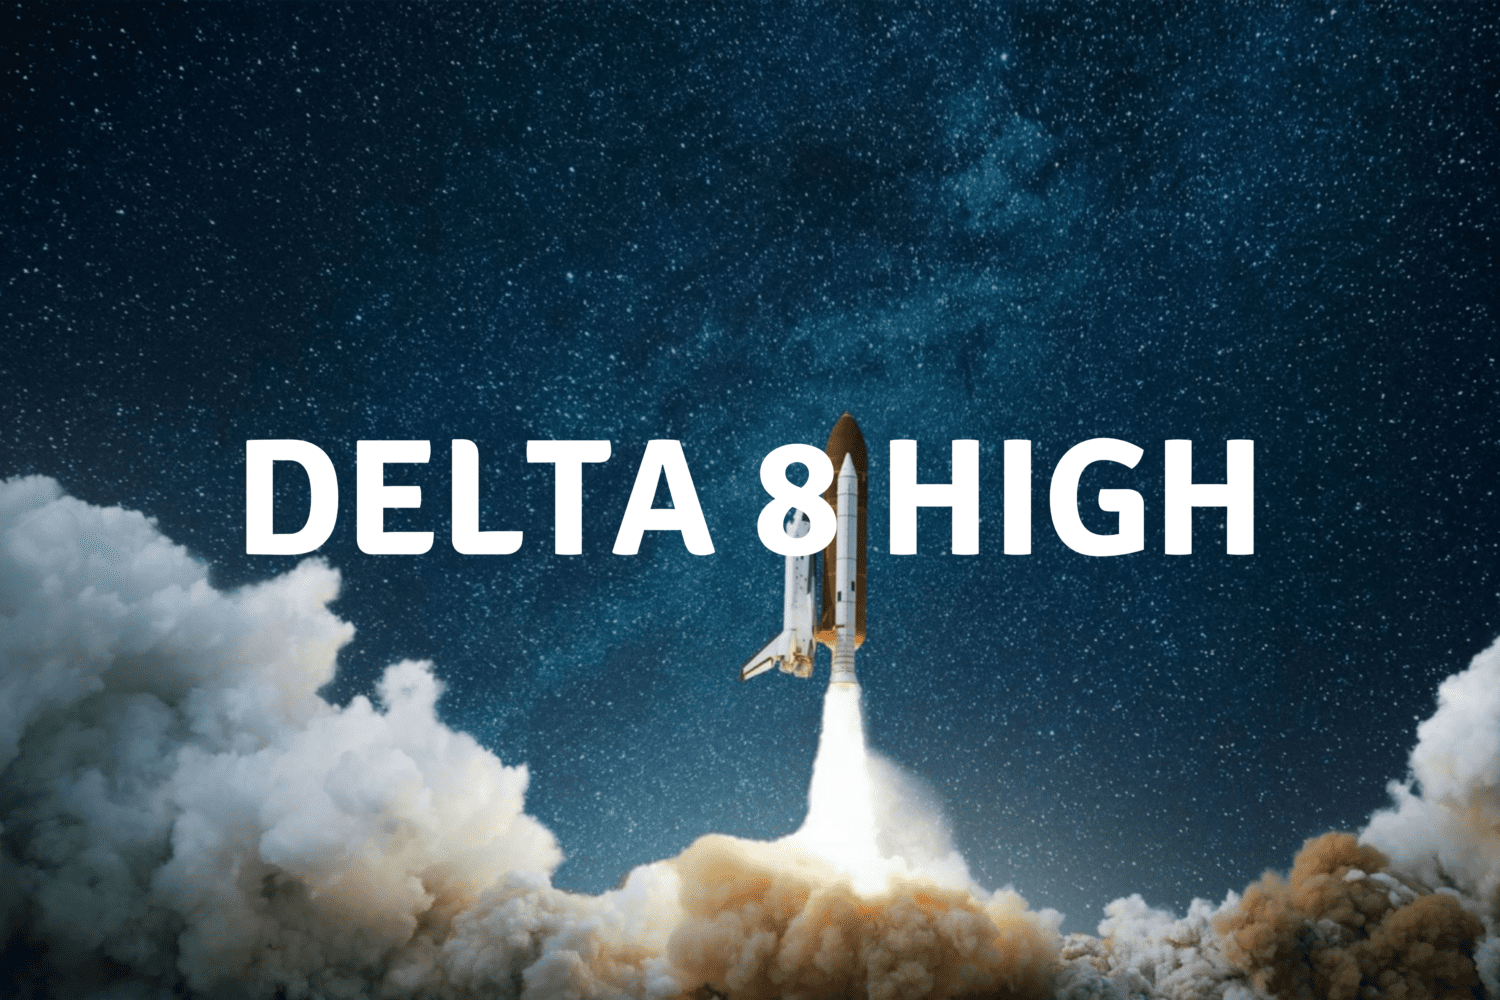 Does Delta 8 Get you “High”?